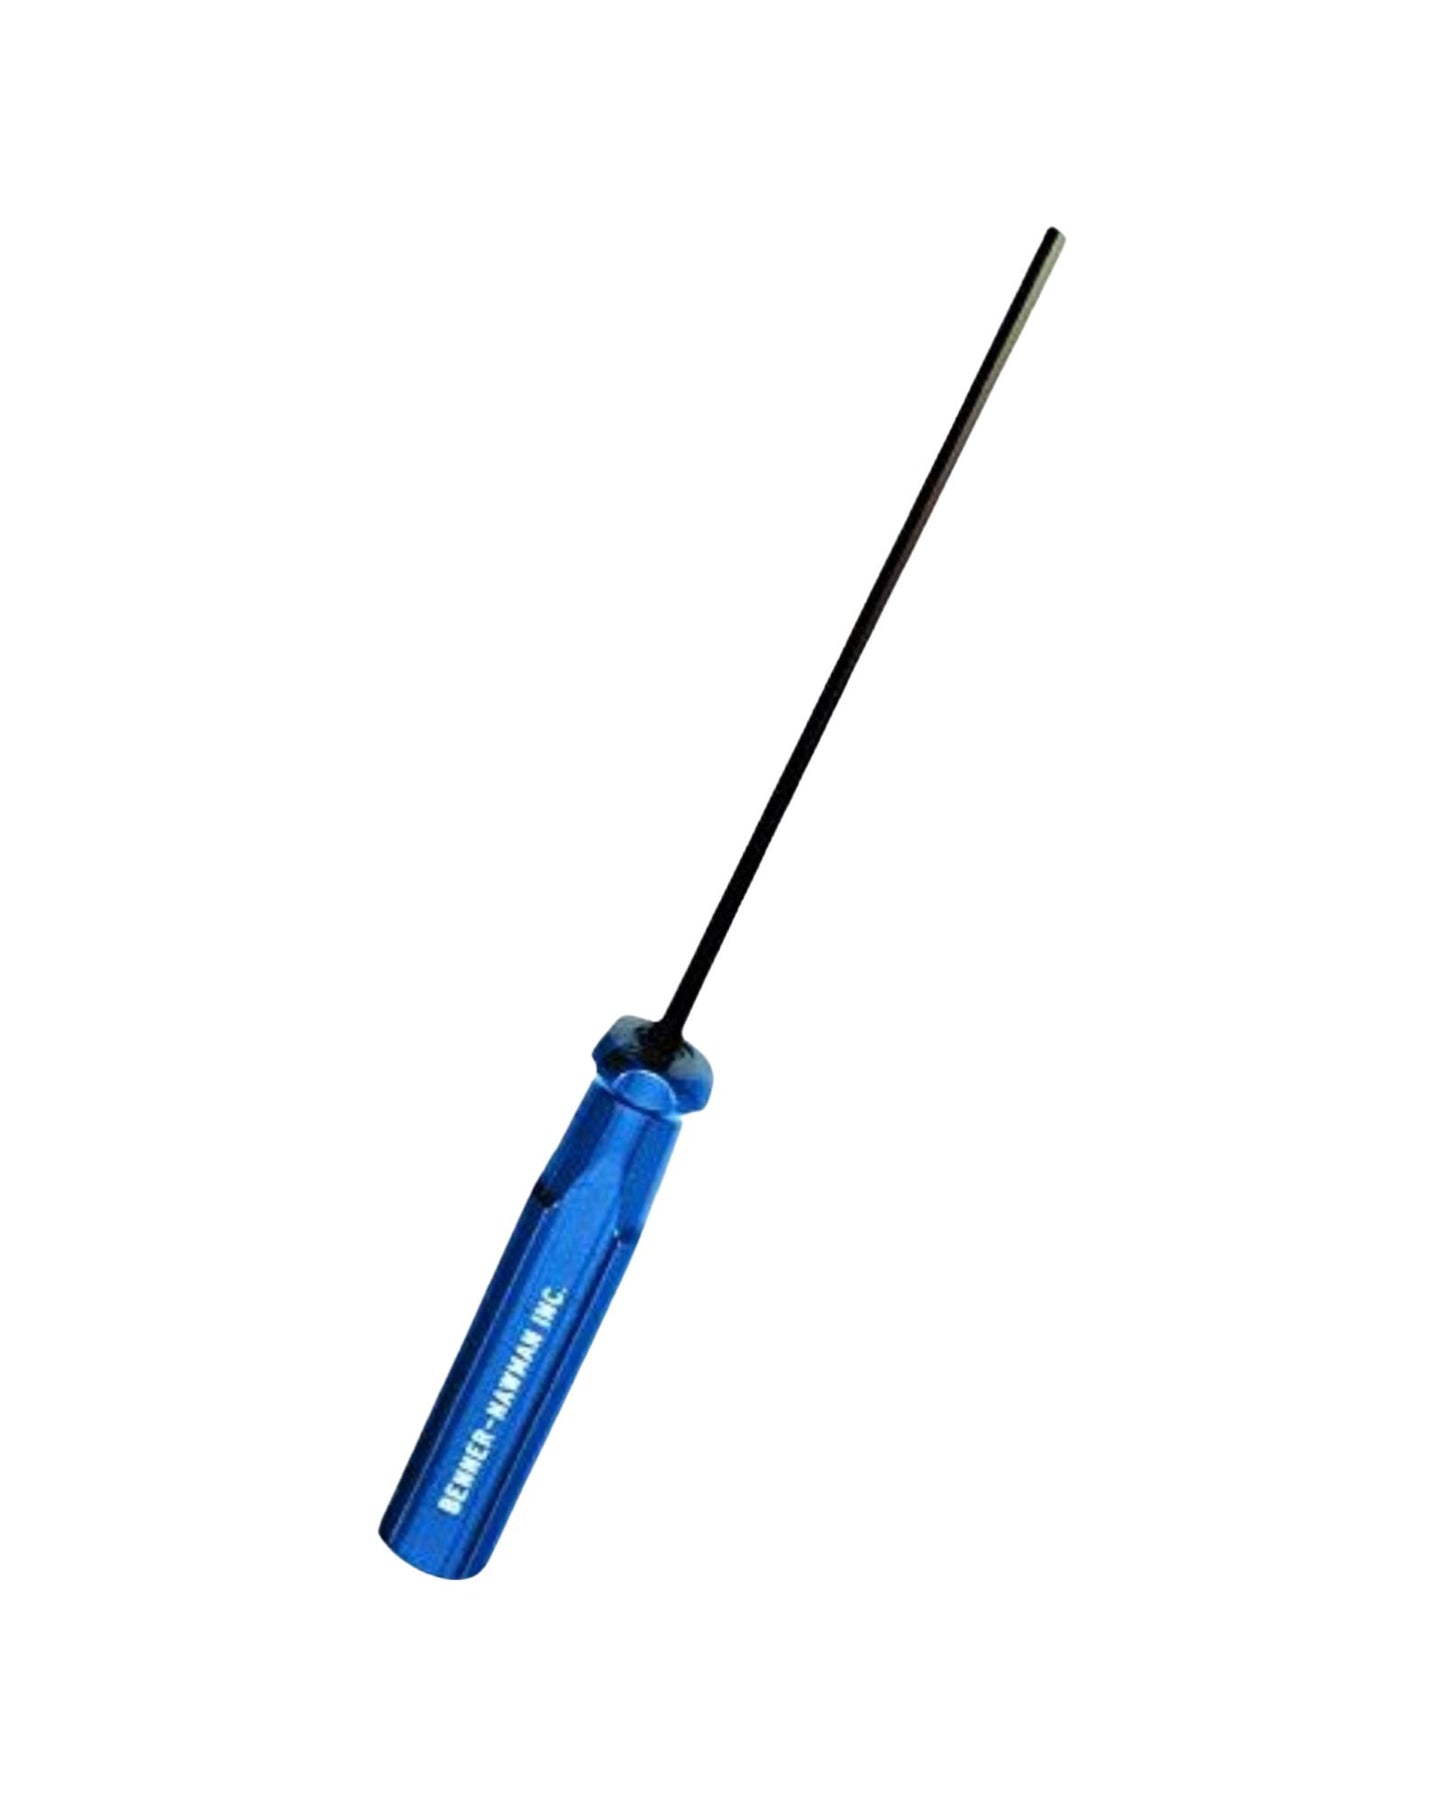 Benner Nawman- 5/32" Hex Security Driver Blue Handle - UPB22 Coaxial Cable Benner-Nawman 